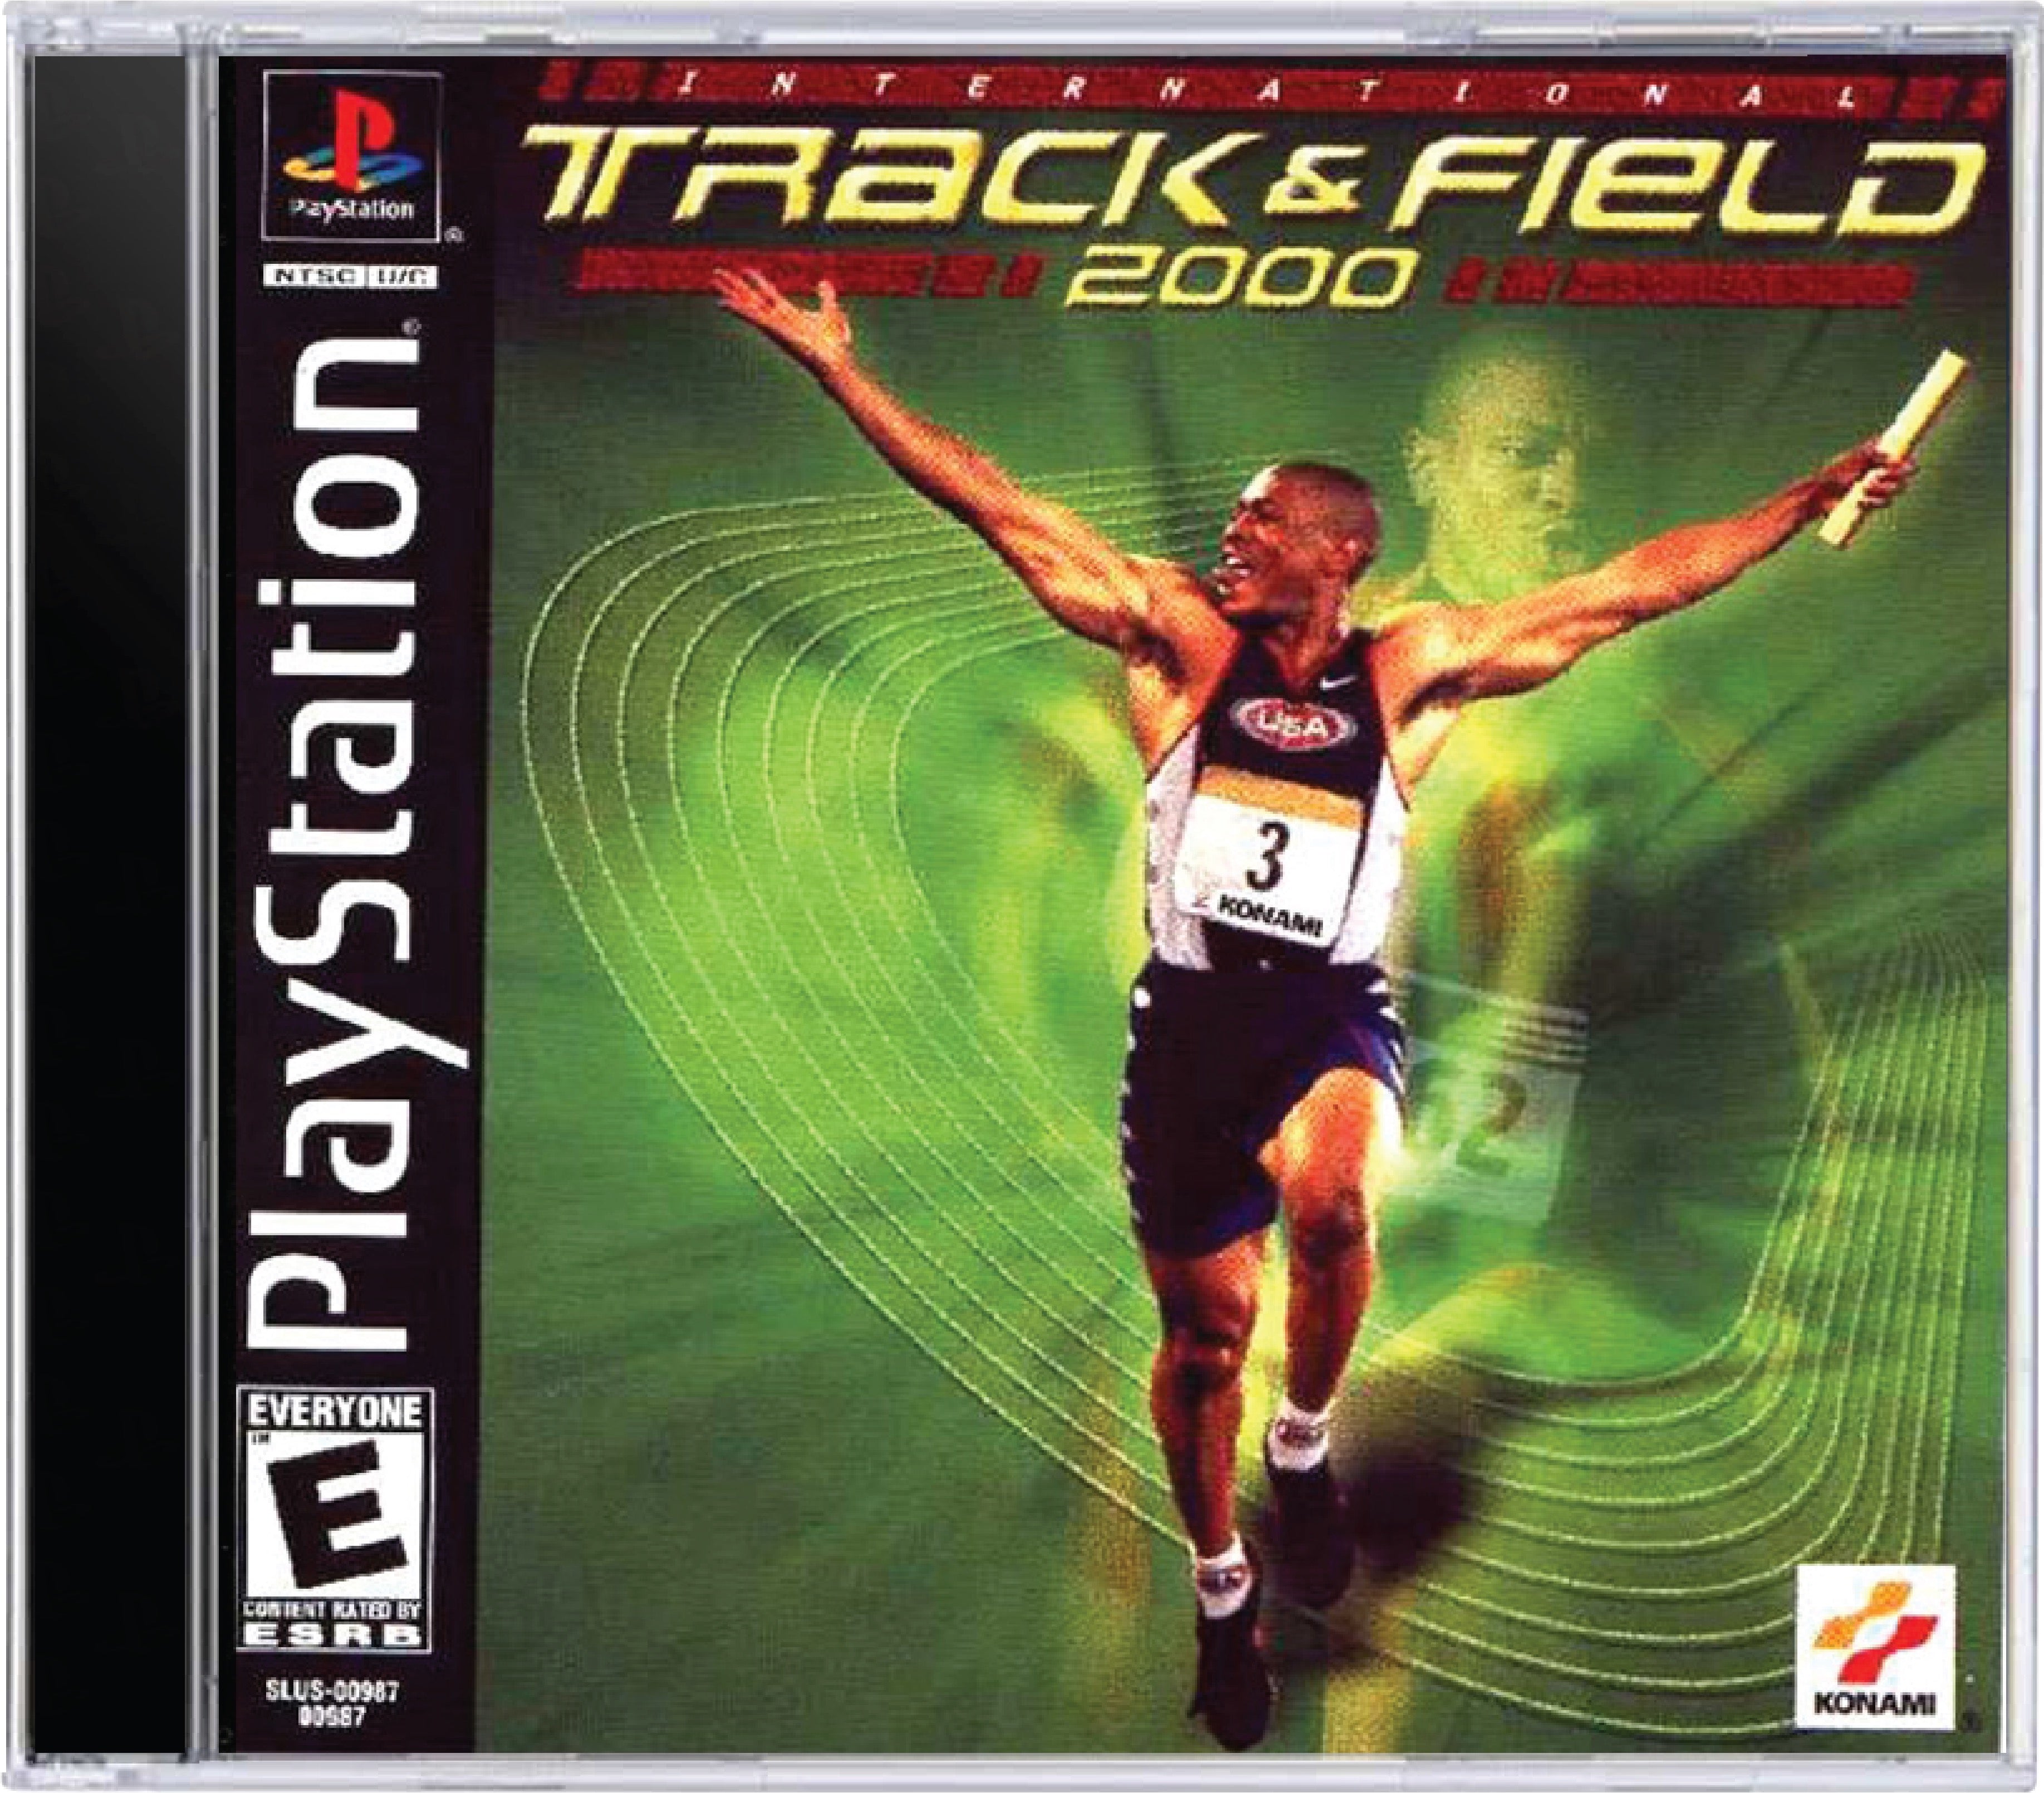 International Track and Field 2000 Cover Art and Product Photo